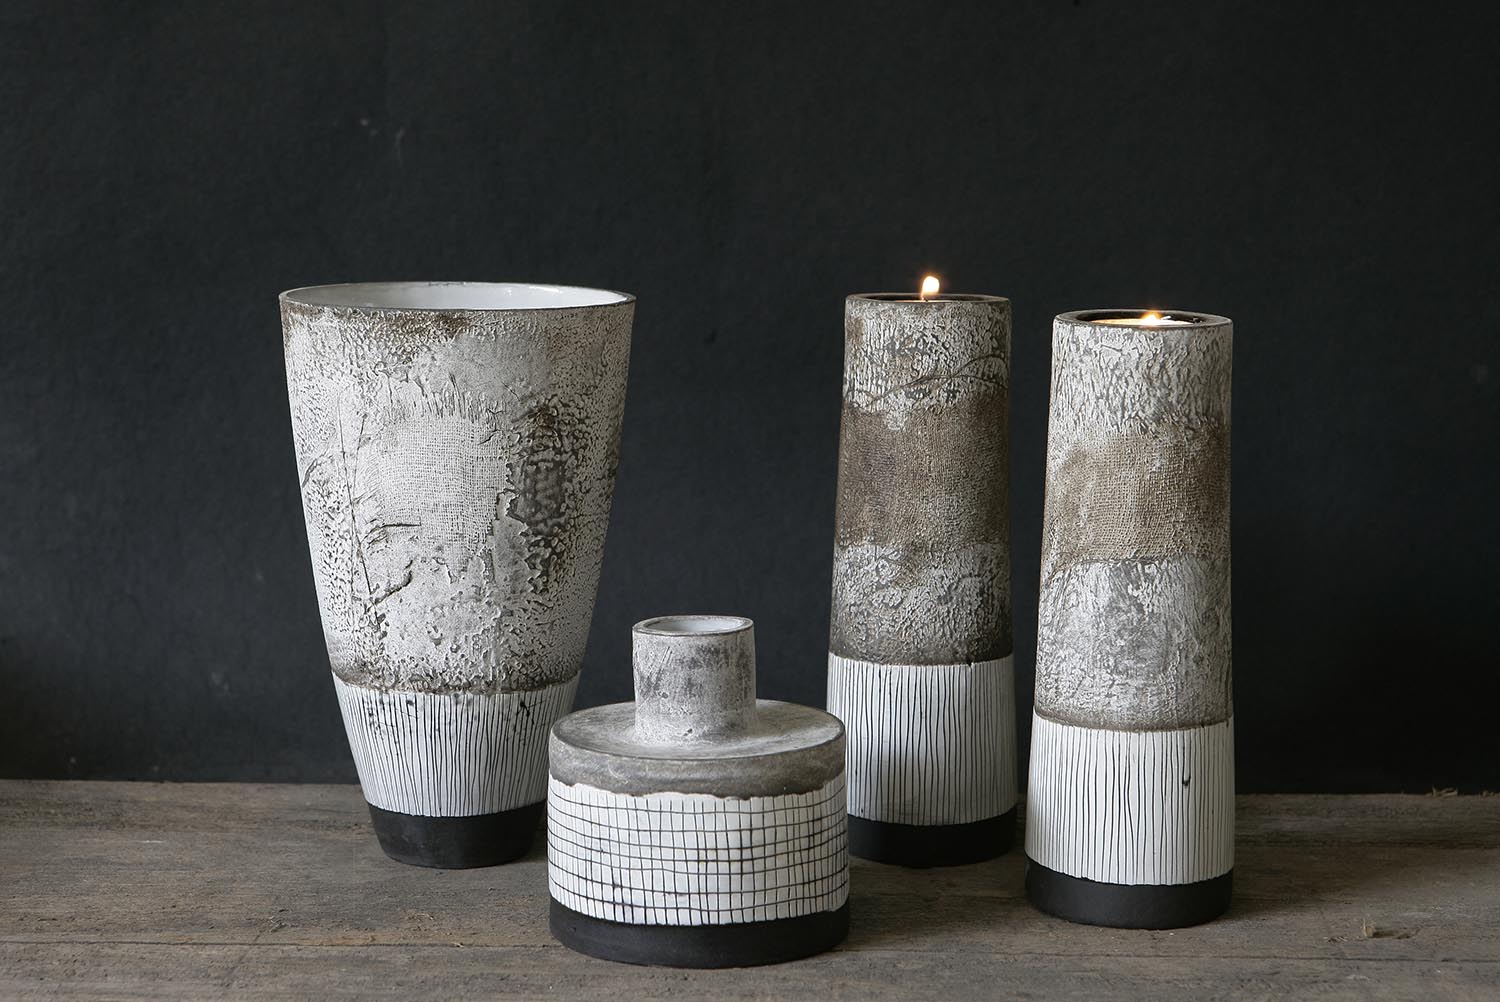 A collection of Helen Vaughan ceramics. These vases, vessels and candle sticks feature a neutral color palette and her signature sgraffito texture. Helen Vaughan ceramics are available at Sarza home décor Store in Rye, New York.